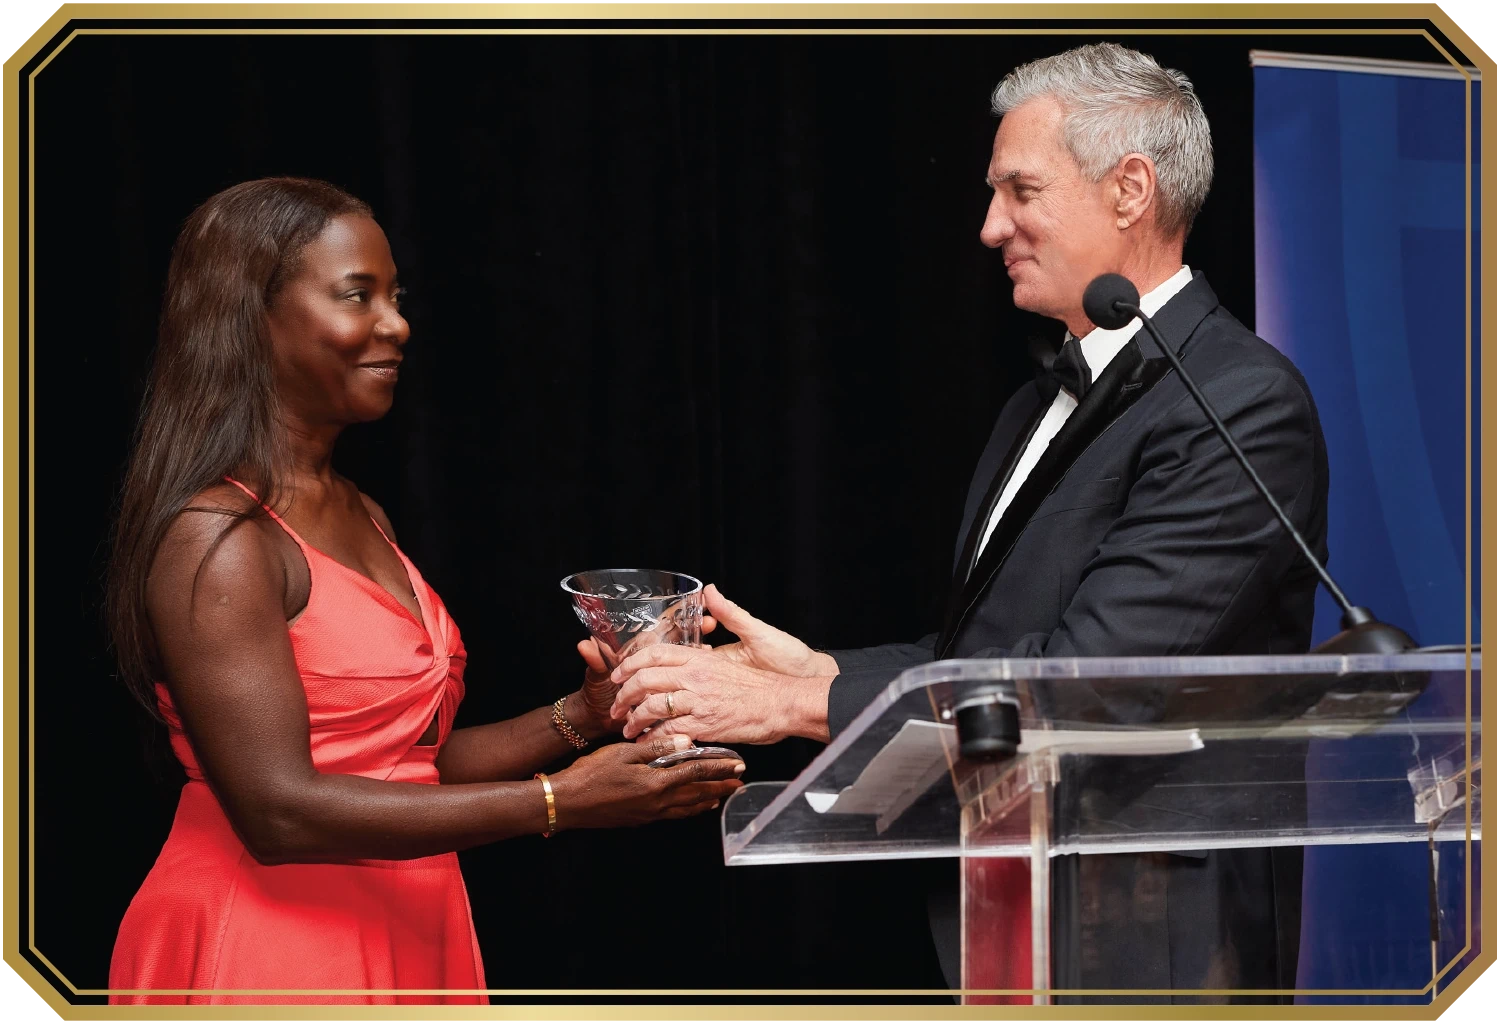 Sandra Lindsay wears a shiny coral dress while accepting her award from President Boomgaarden